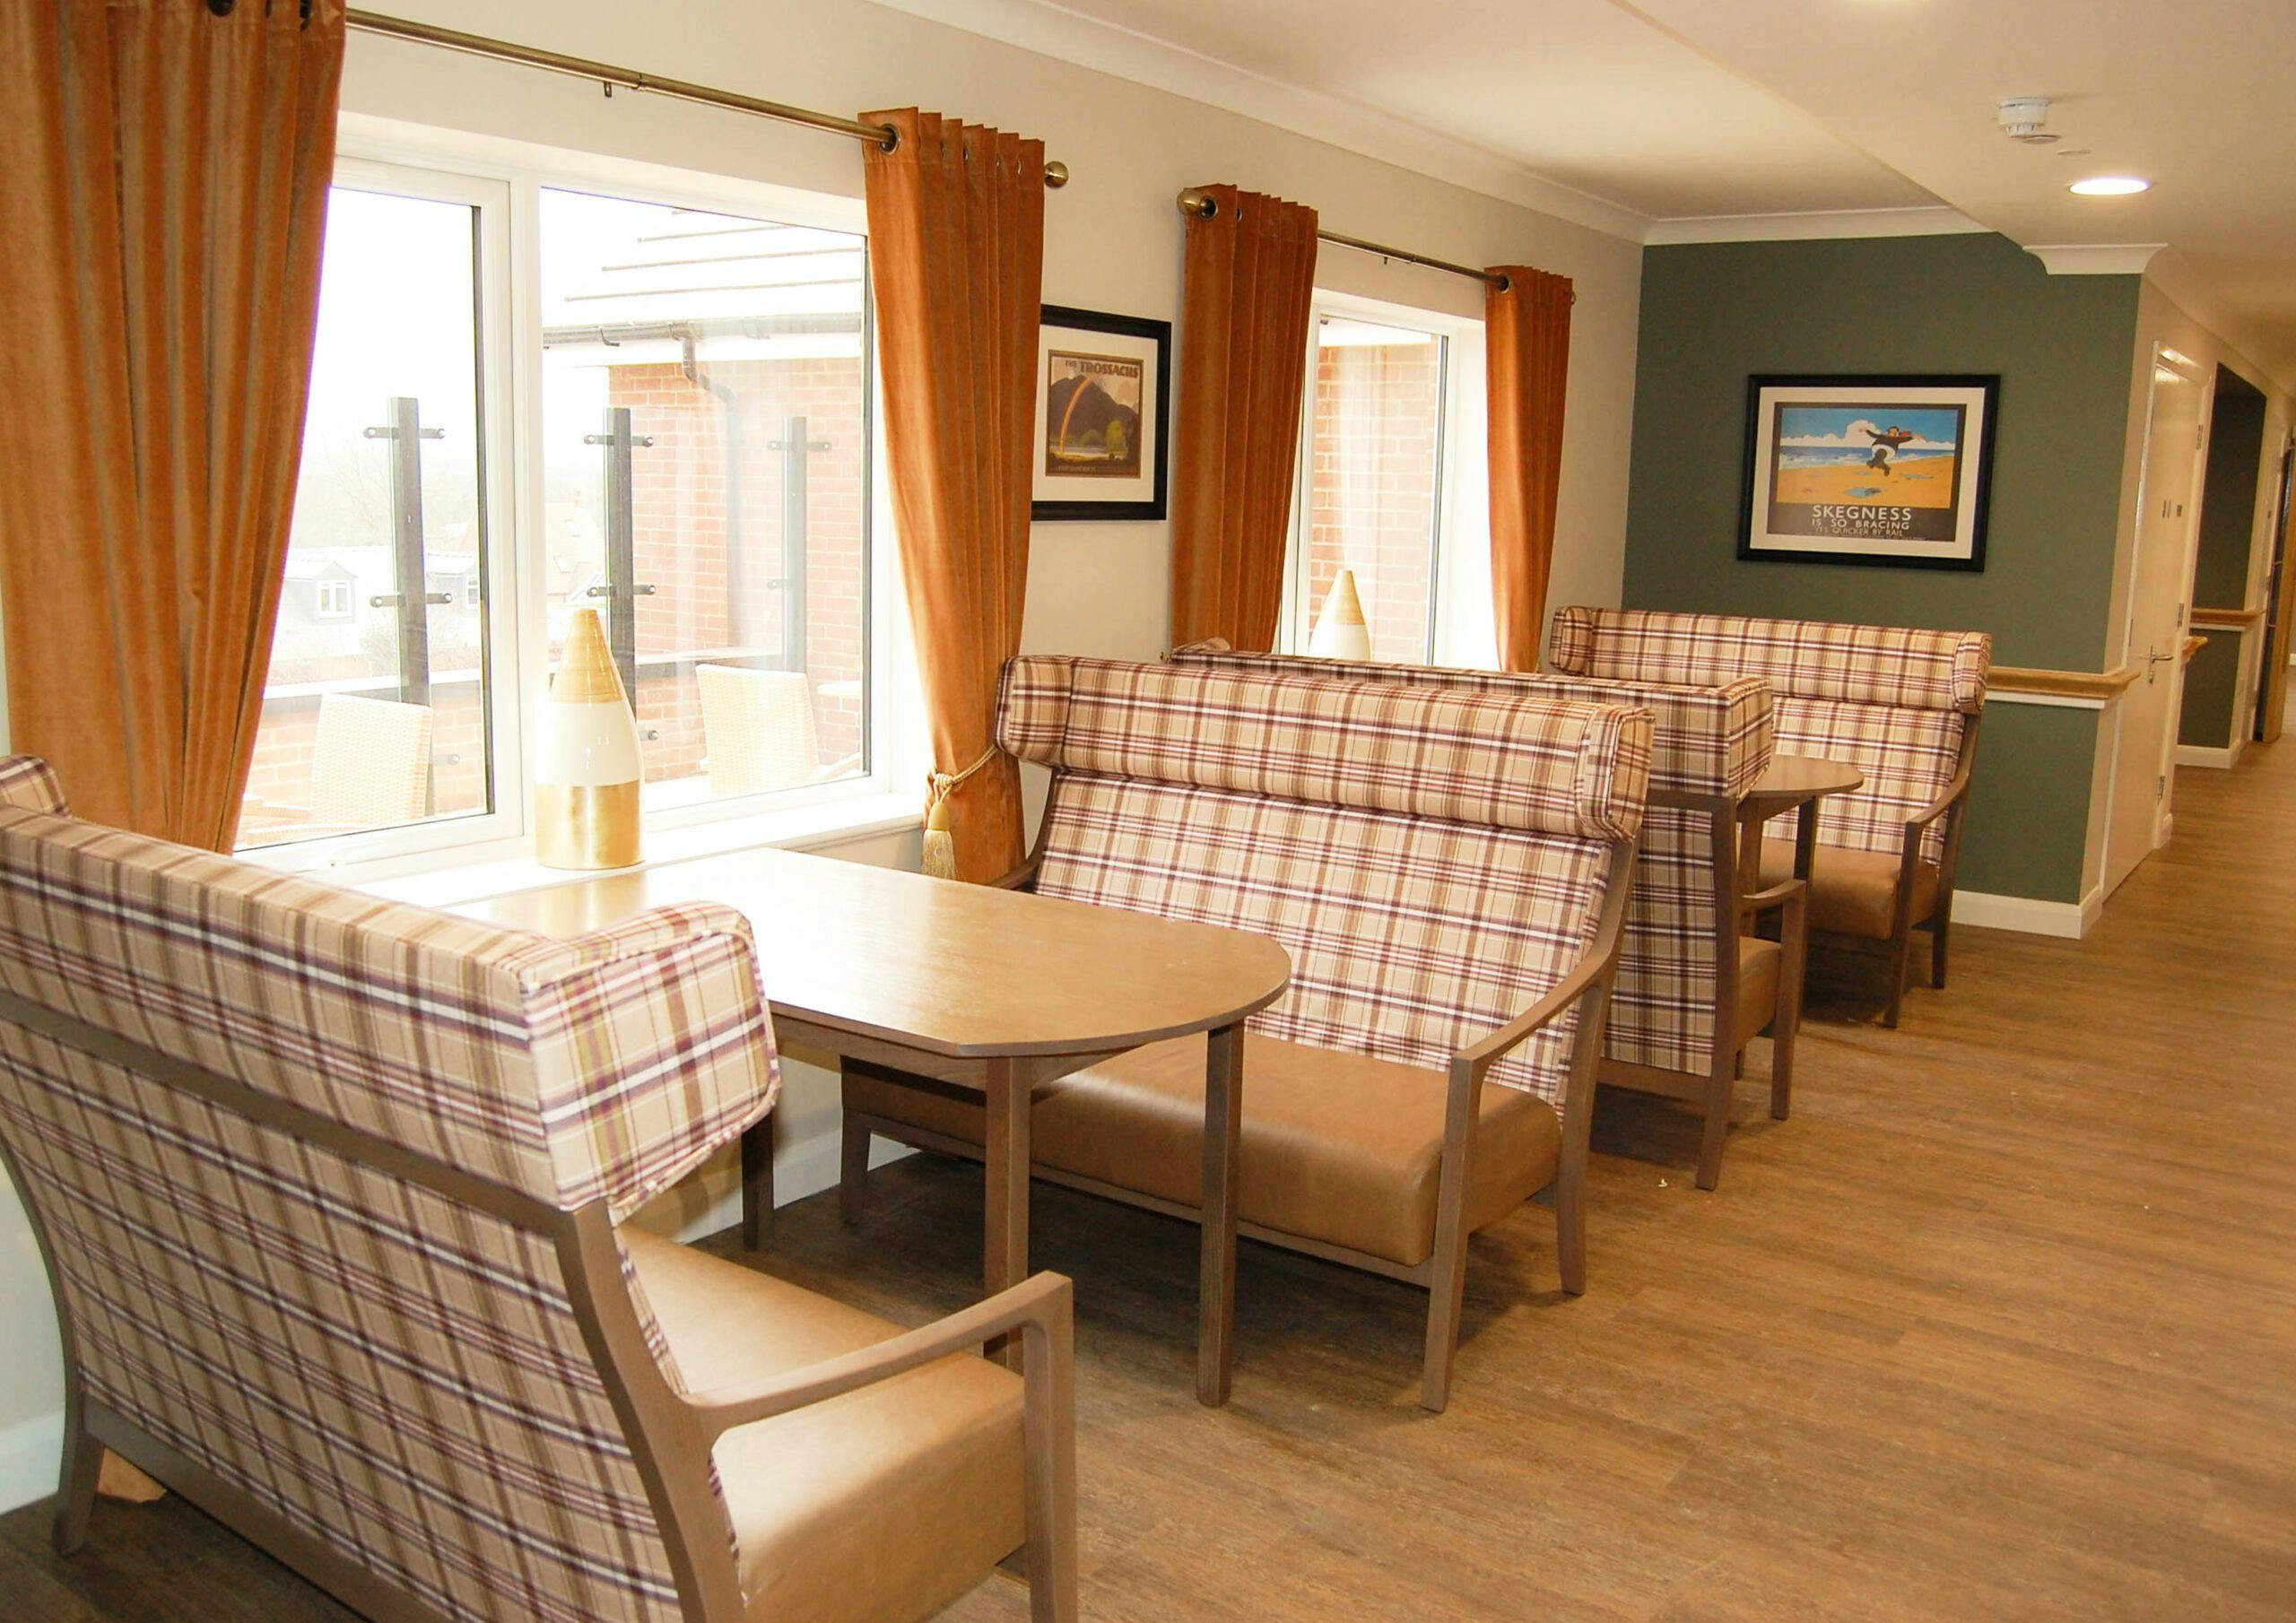 Seating area of Thimbleby Court care home in Horncastle, Lincolnshire